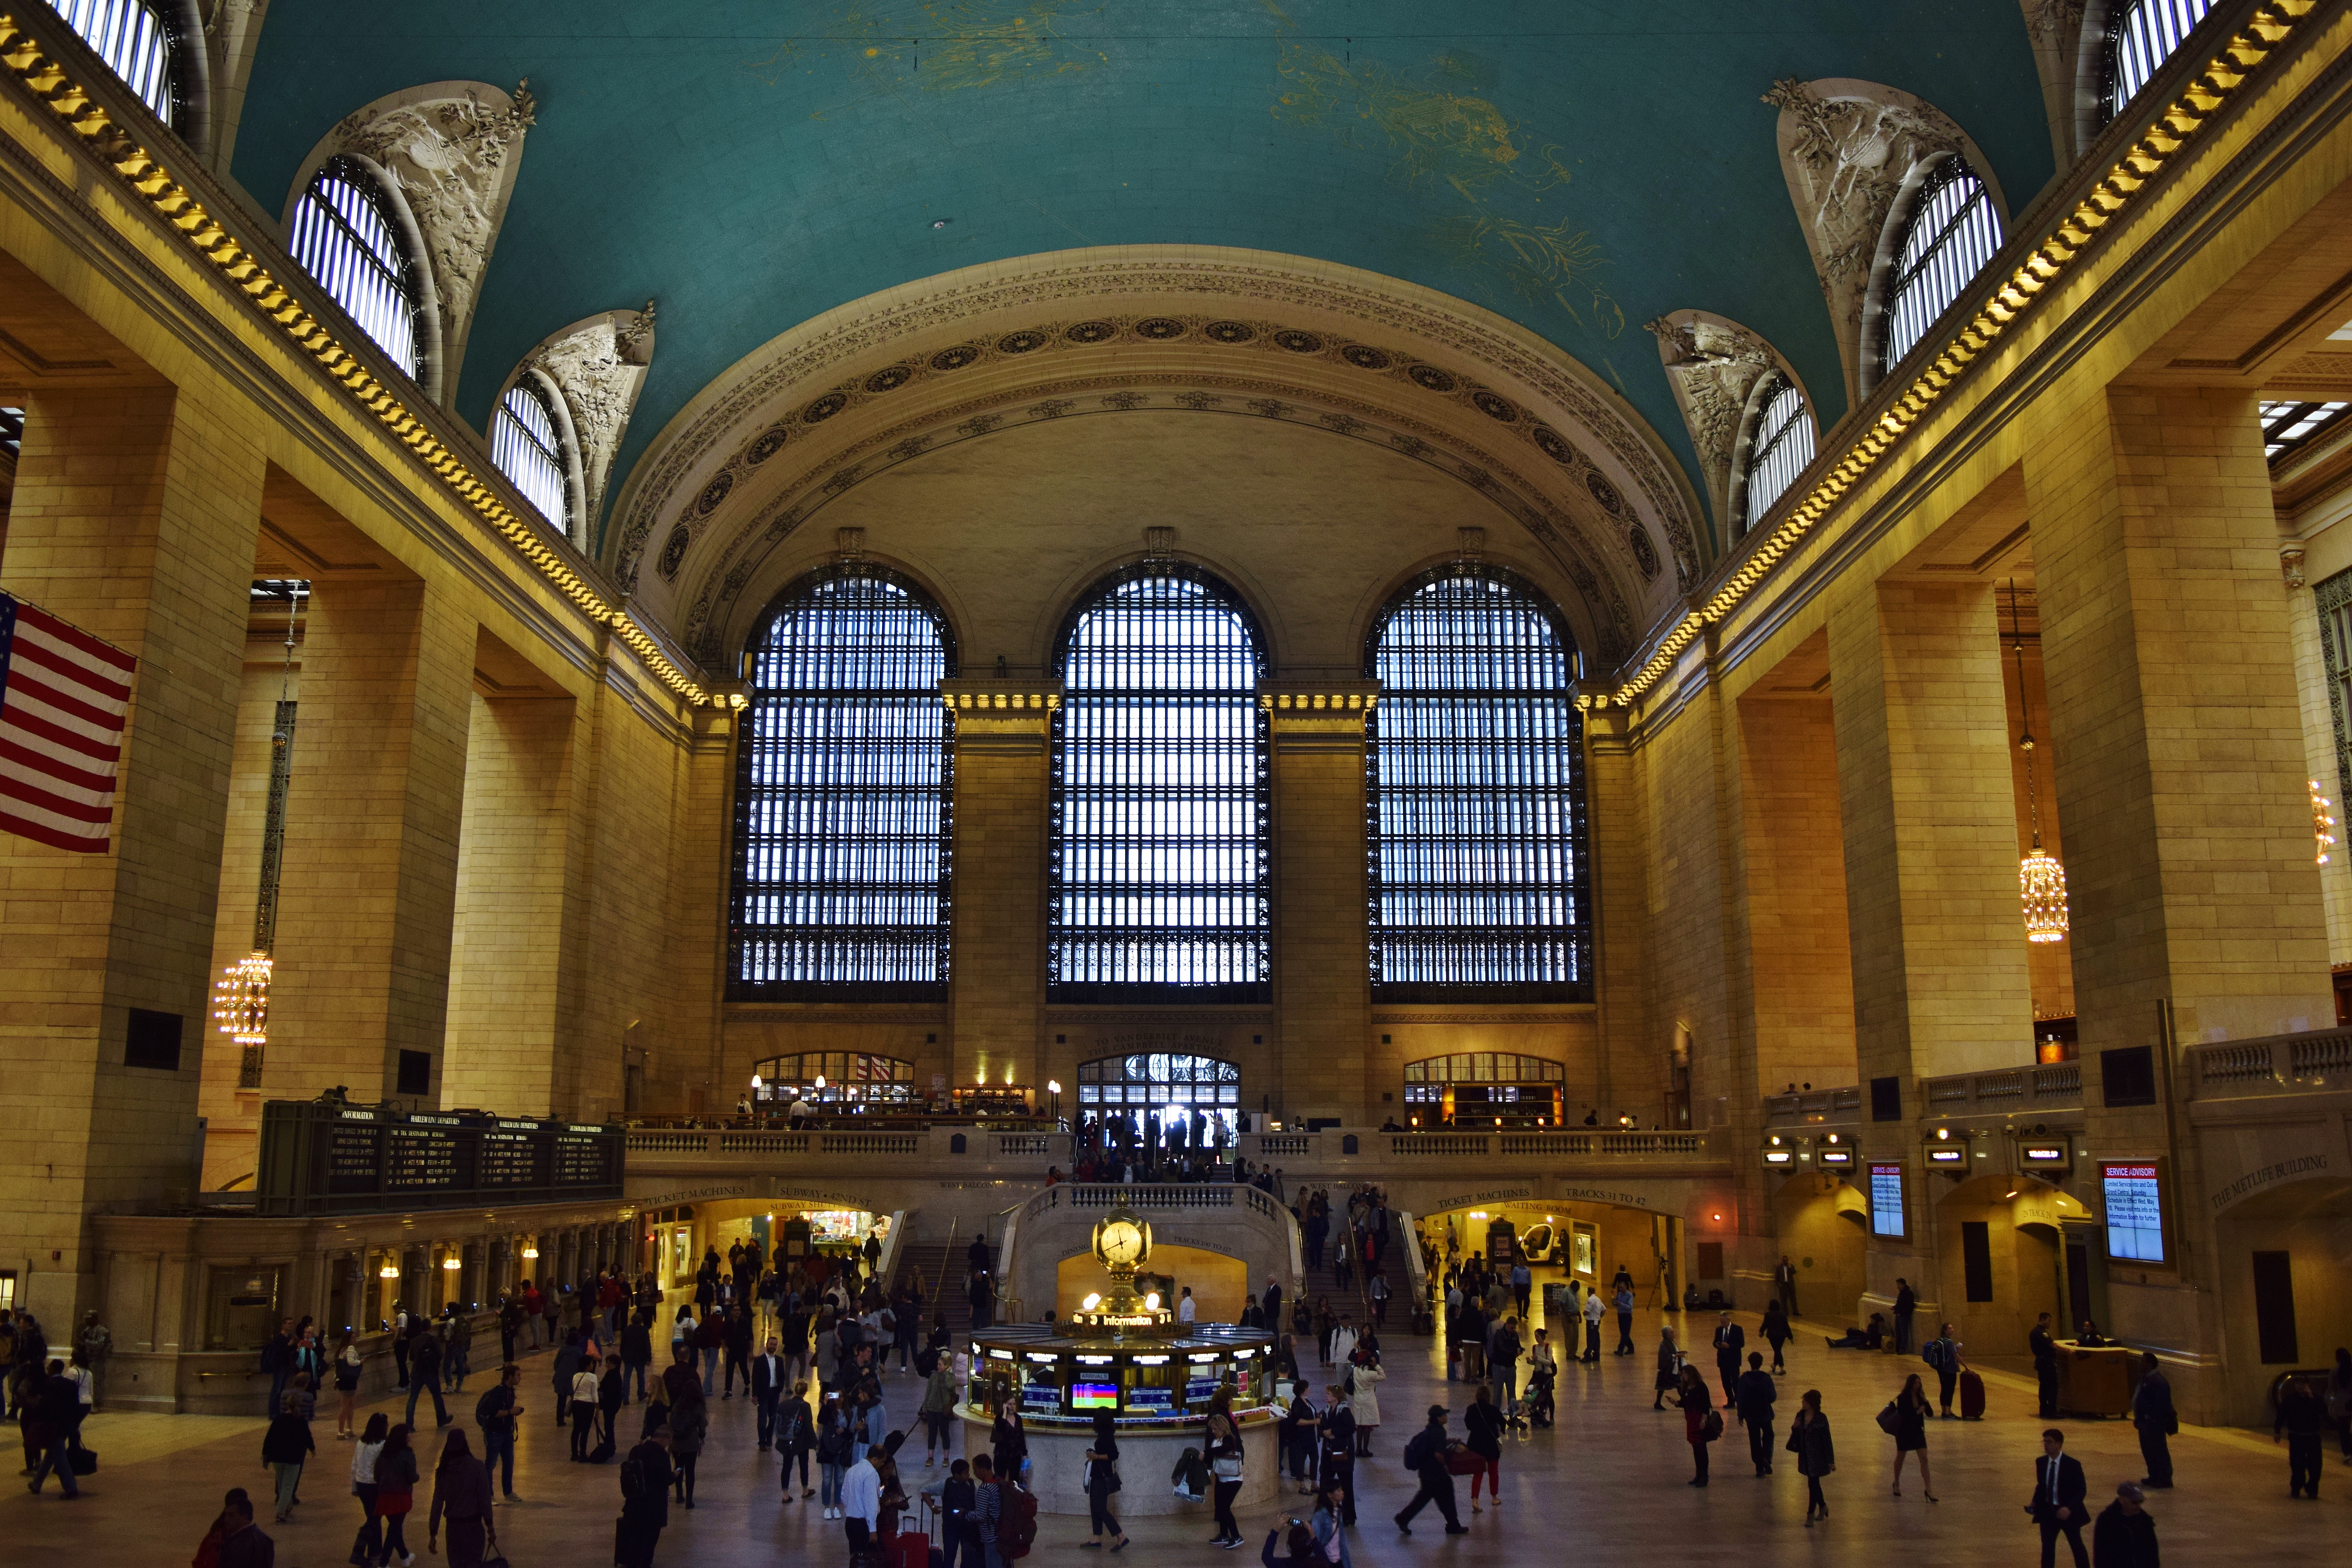 Grand Central during the daytime.